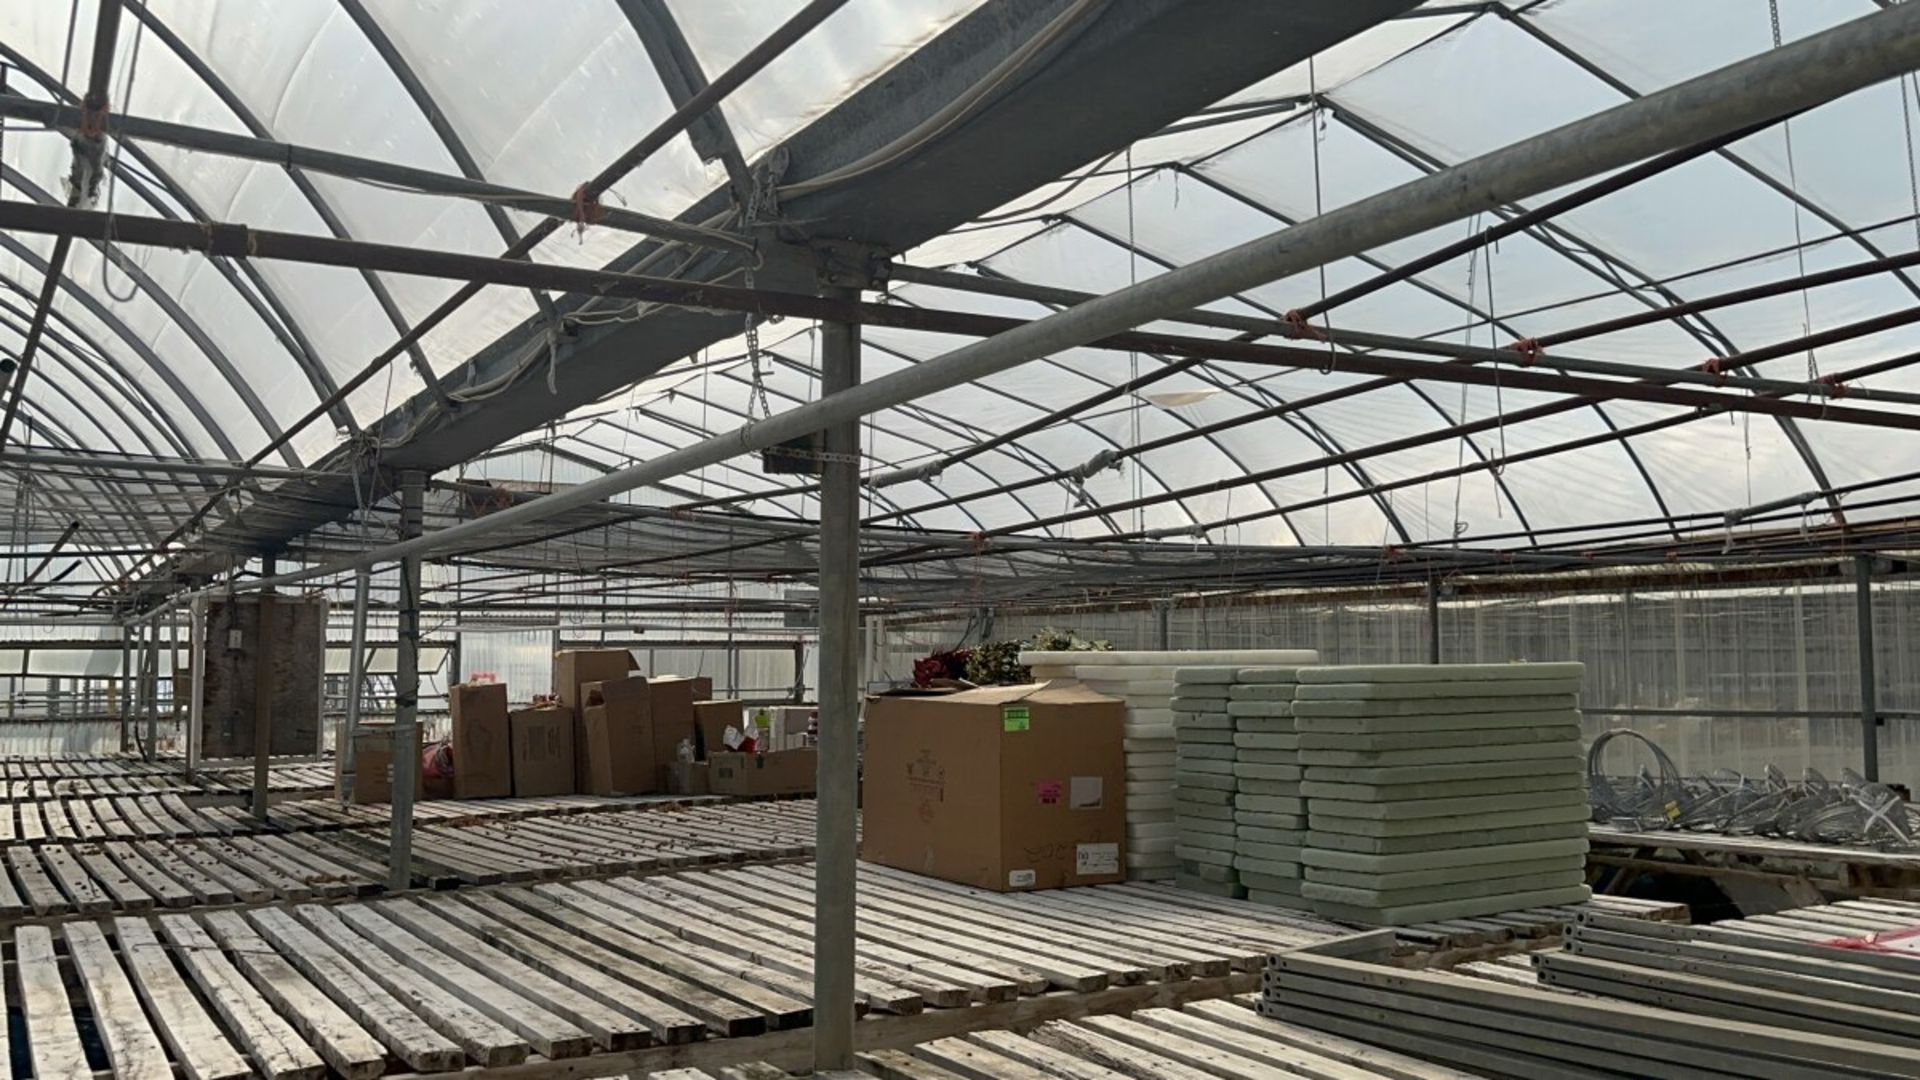 WESTBROOK GUTTER CONNECT 2-BAY GREENHOUSE 60FT X 144FT X 96” H & 2-BAY 60FT X 72 FT X 96”, INCLUDING - Image 84 of 95